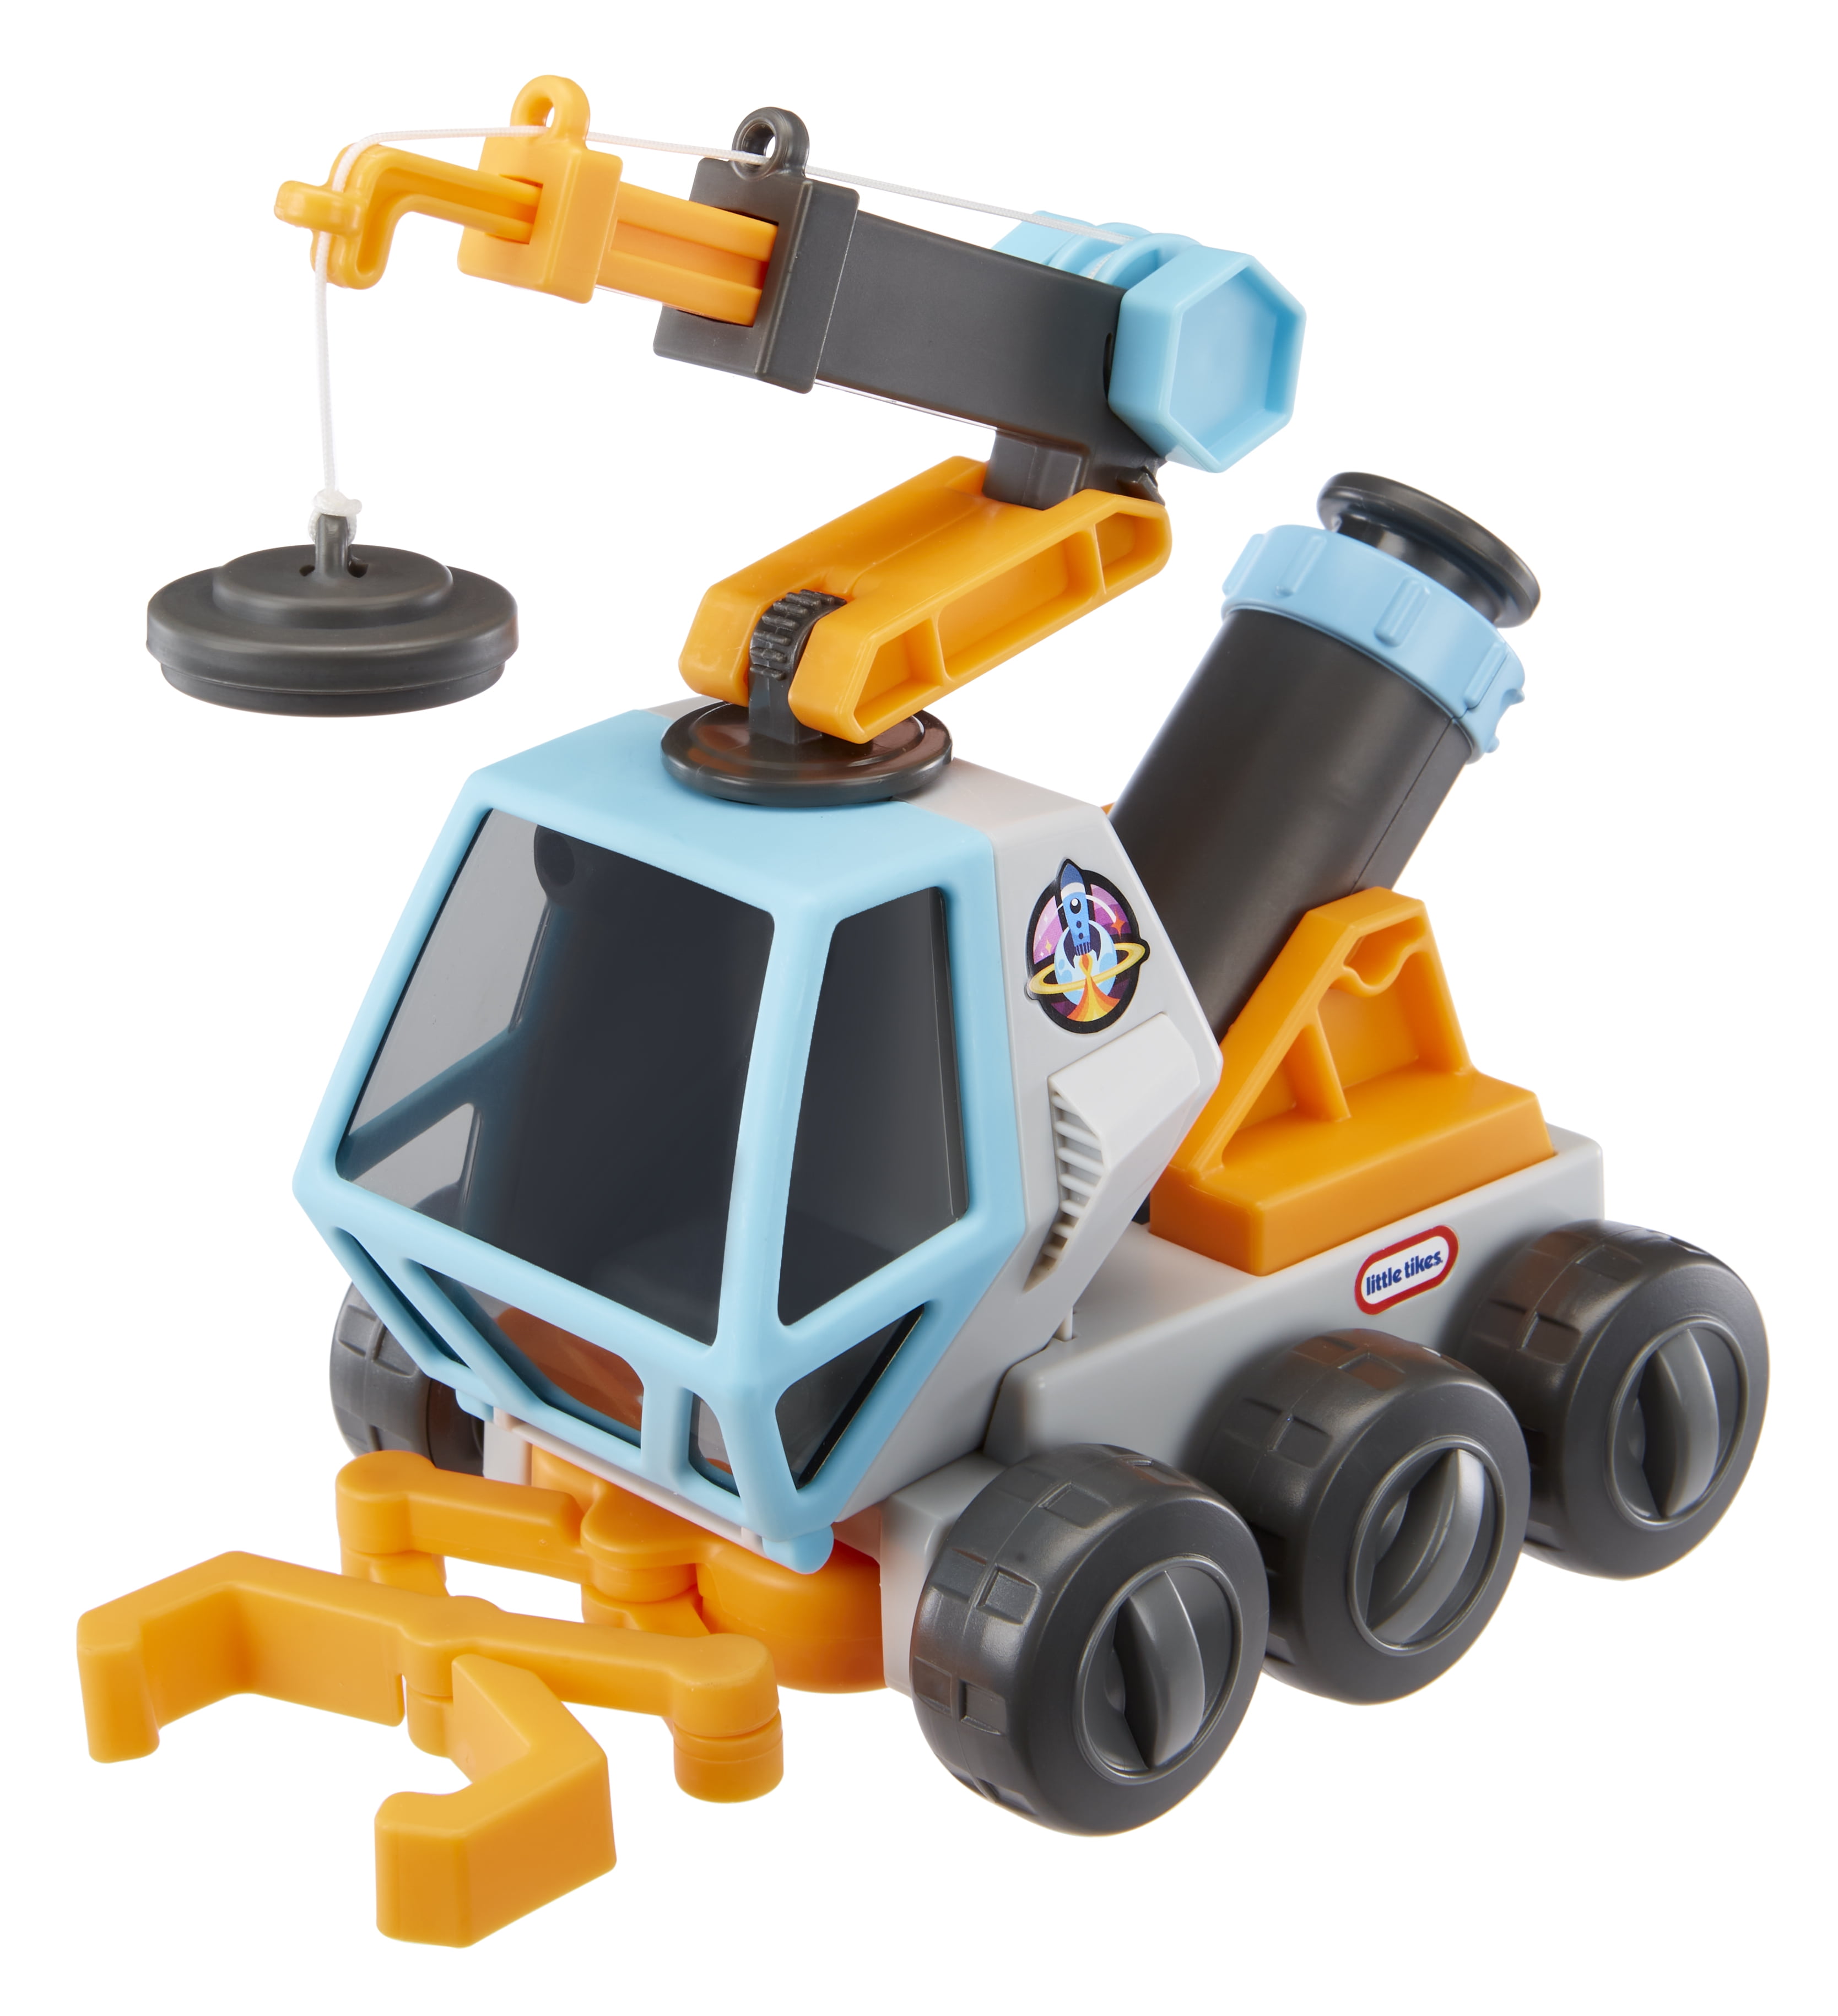 Little Tikes Big Adventures Space Rover STEM Toy Vehicle with Microscope, Magnetic Crane, C for Girls, Boys, Kids Ages 3+